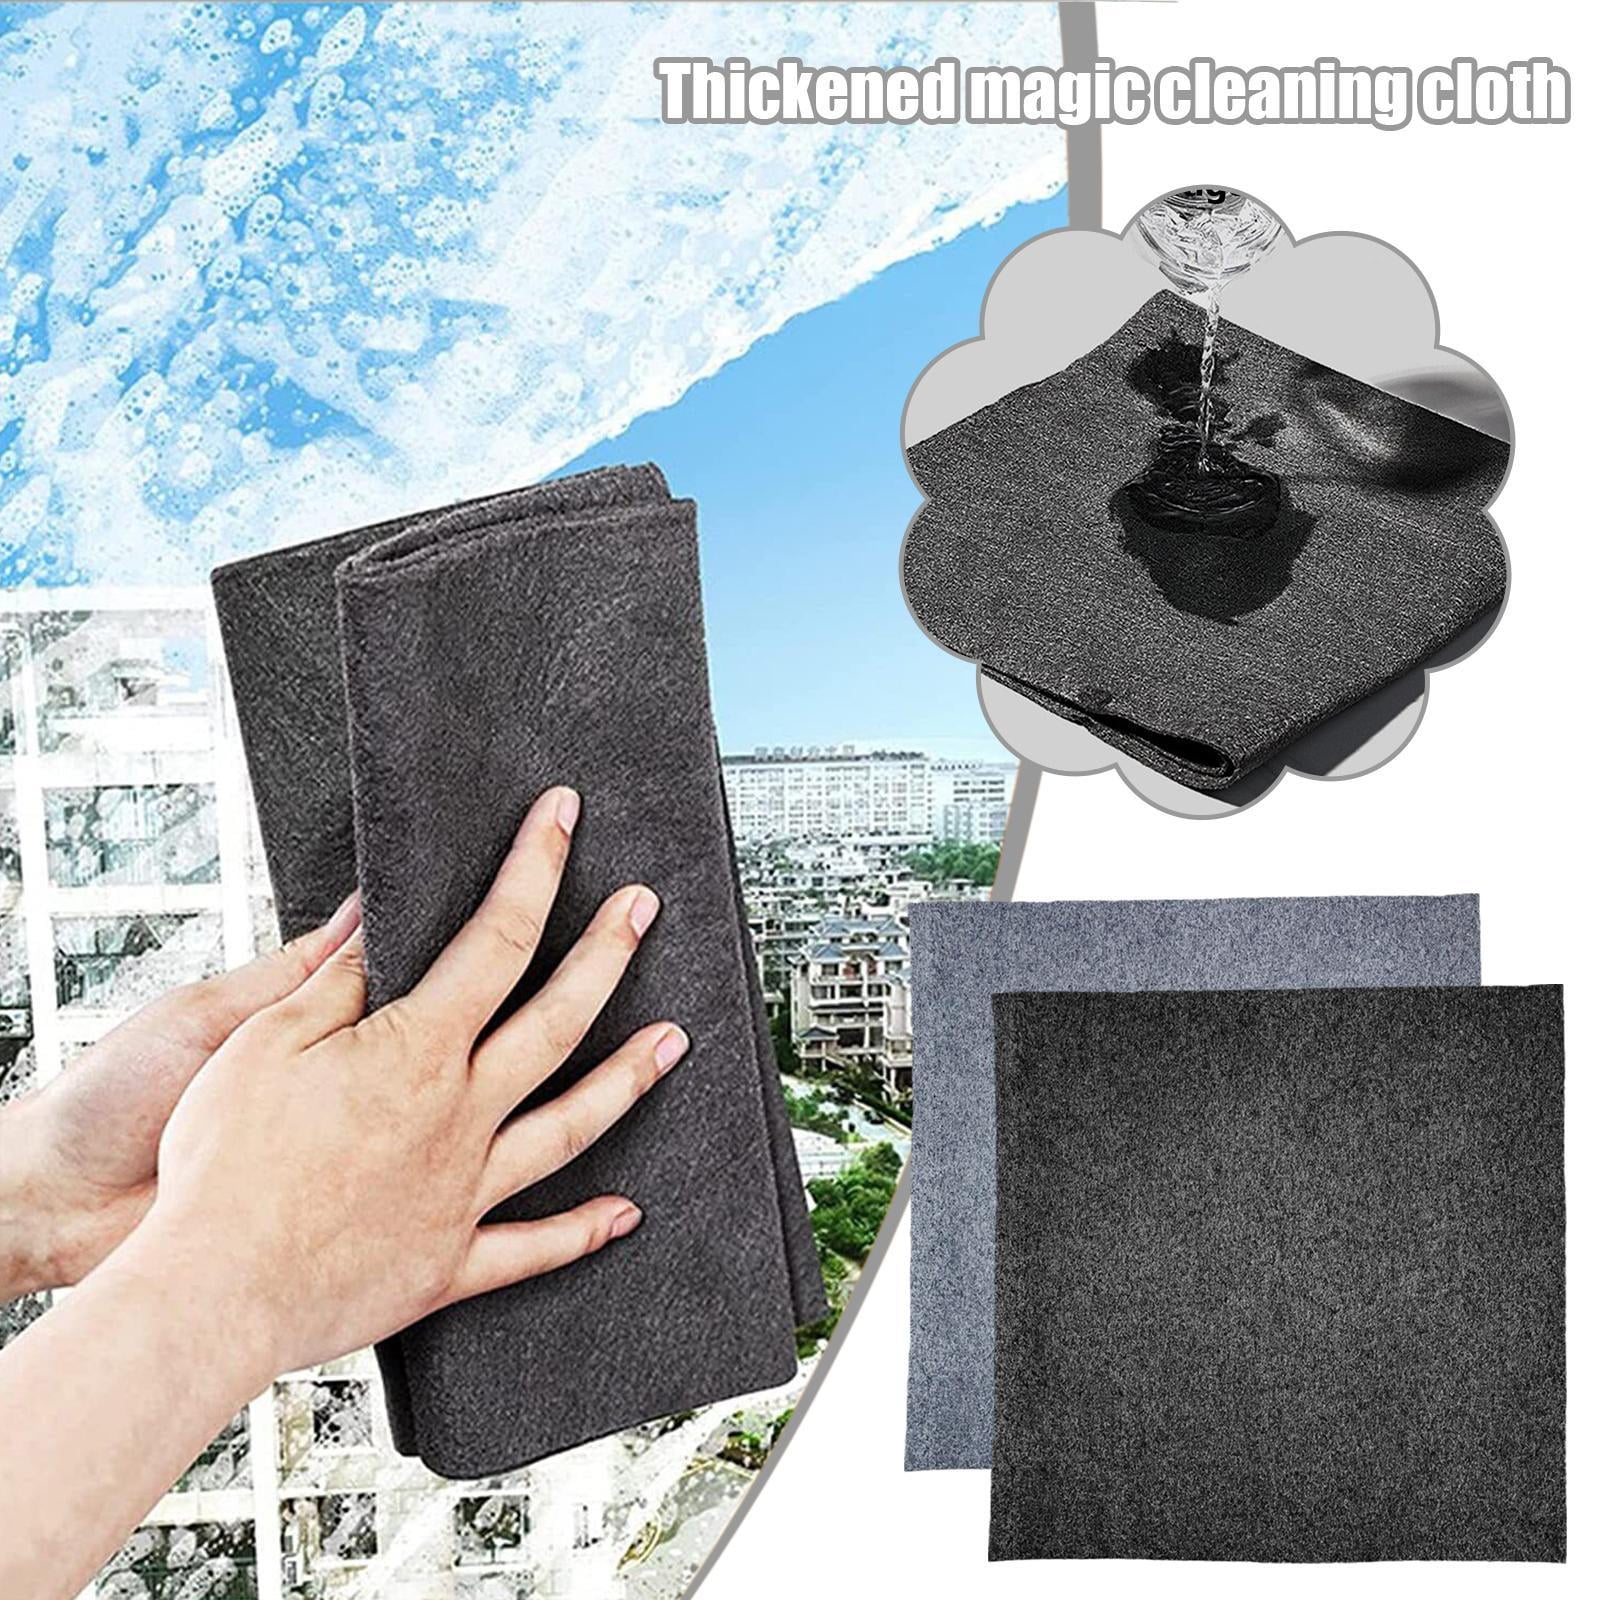 Duirubeo 5PC Thickened Magic Cleaning Cloth, Reusable Microfiber Cleaning  Rags for TV, Cars, Windows, Lint Free, Odorless, Machine Washable